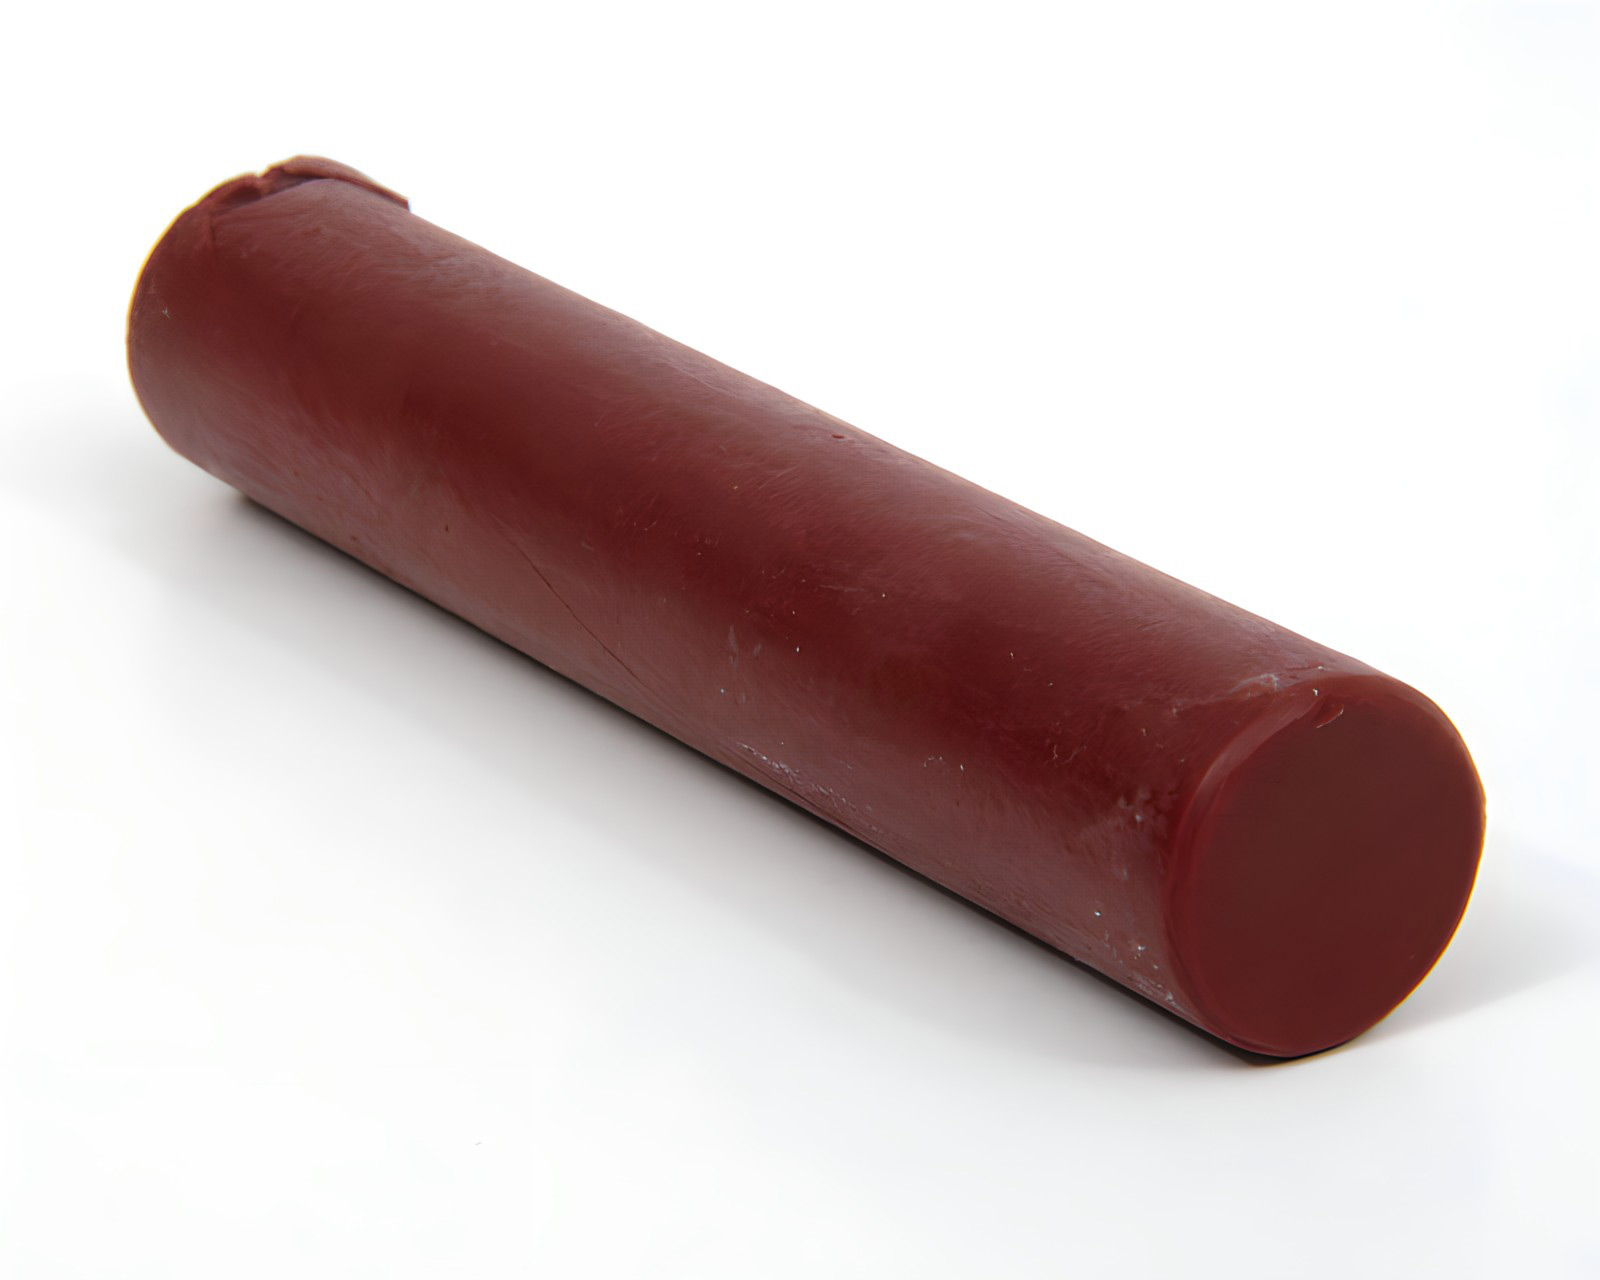 Beeswax Filler Sticks - Red Brown - Gilly's ®